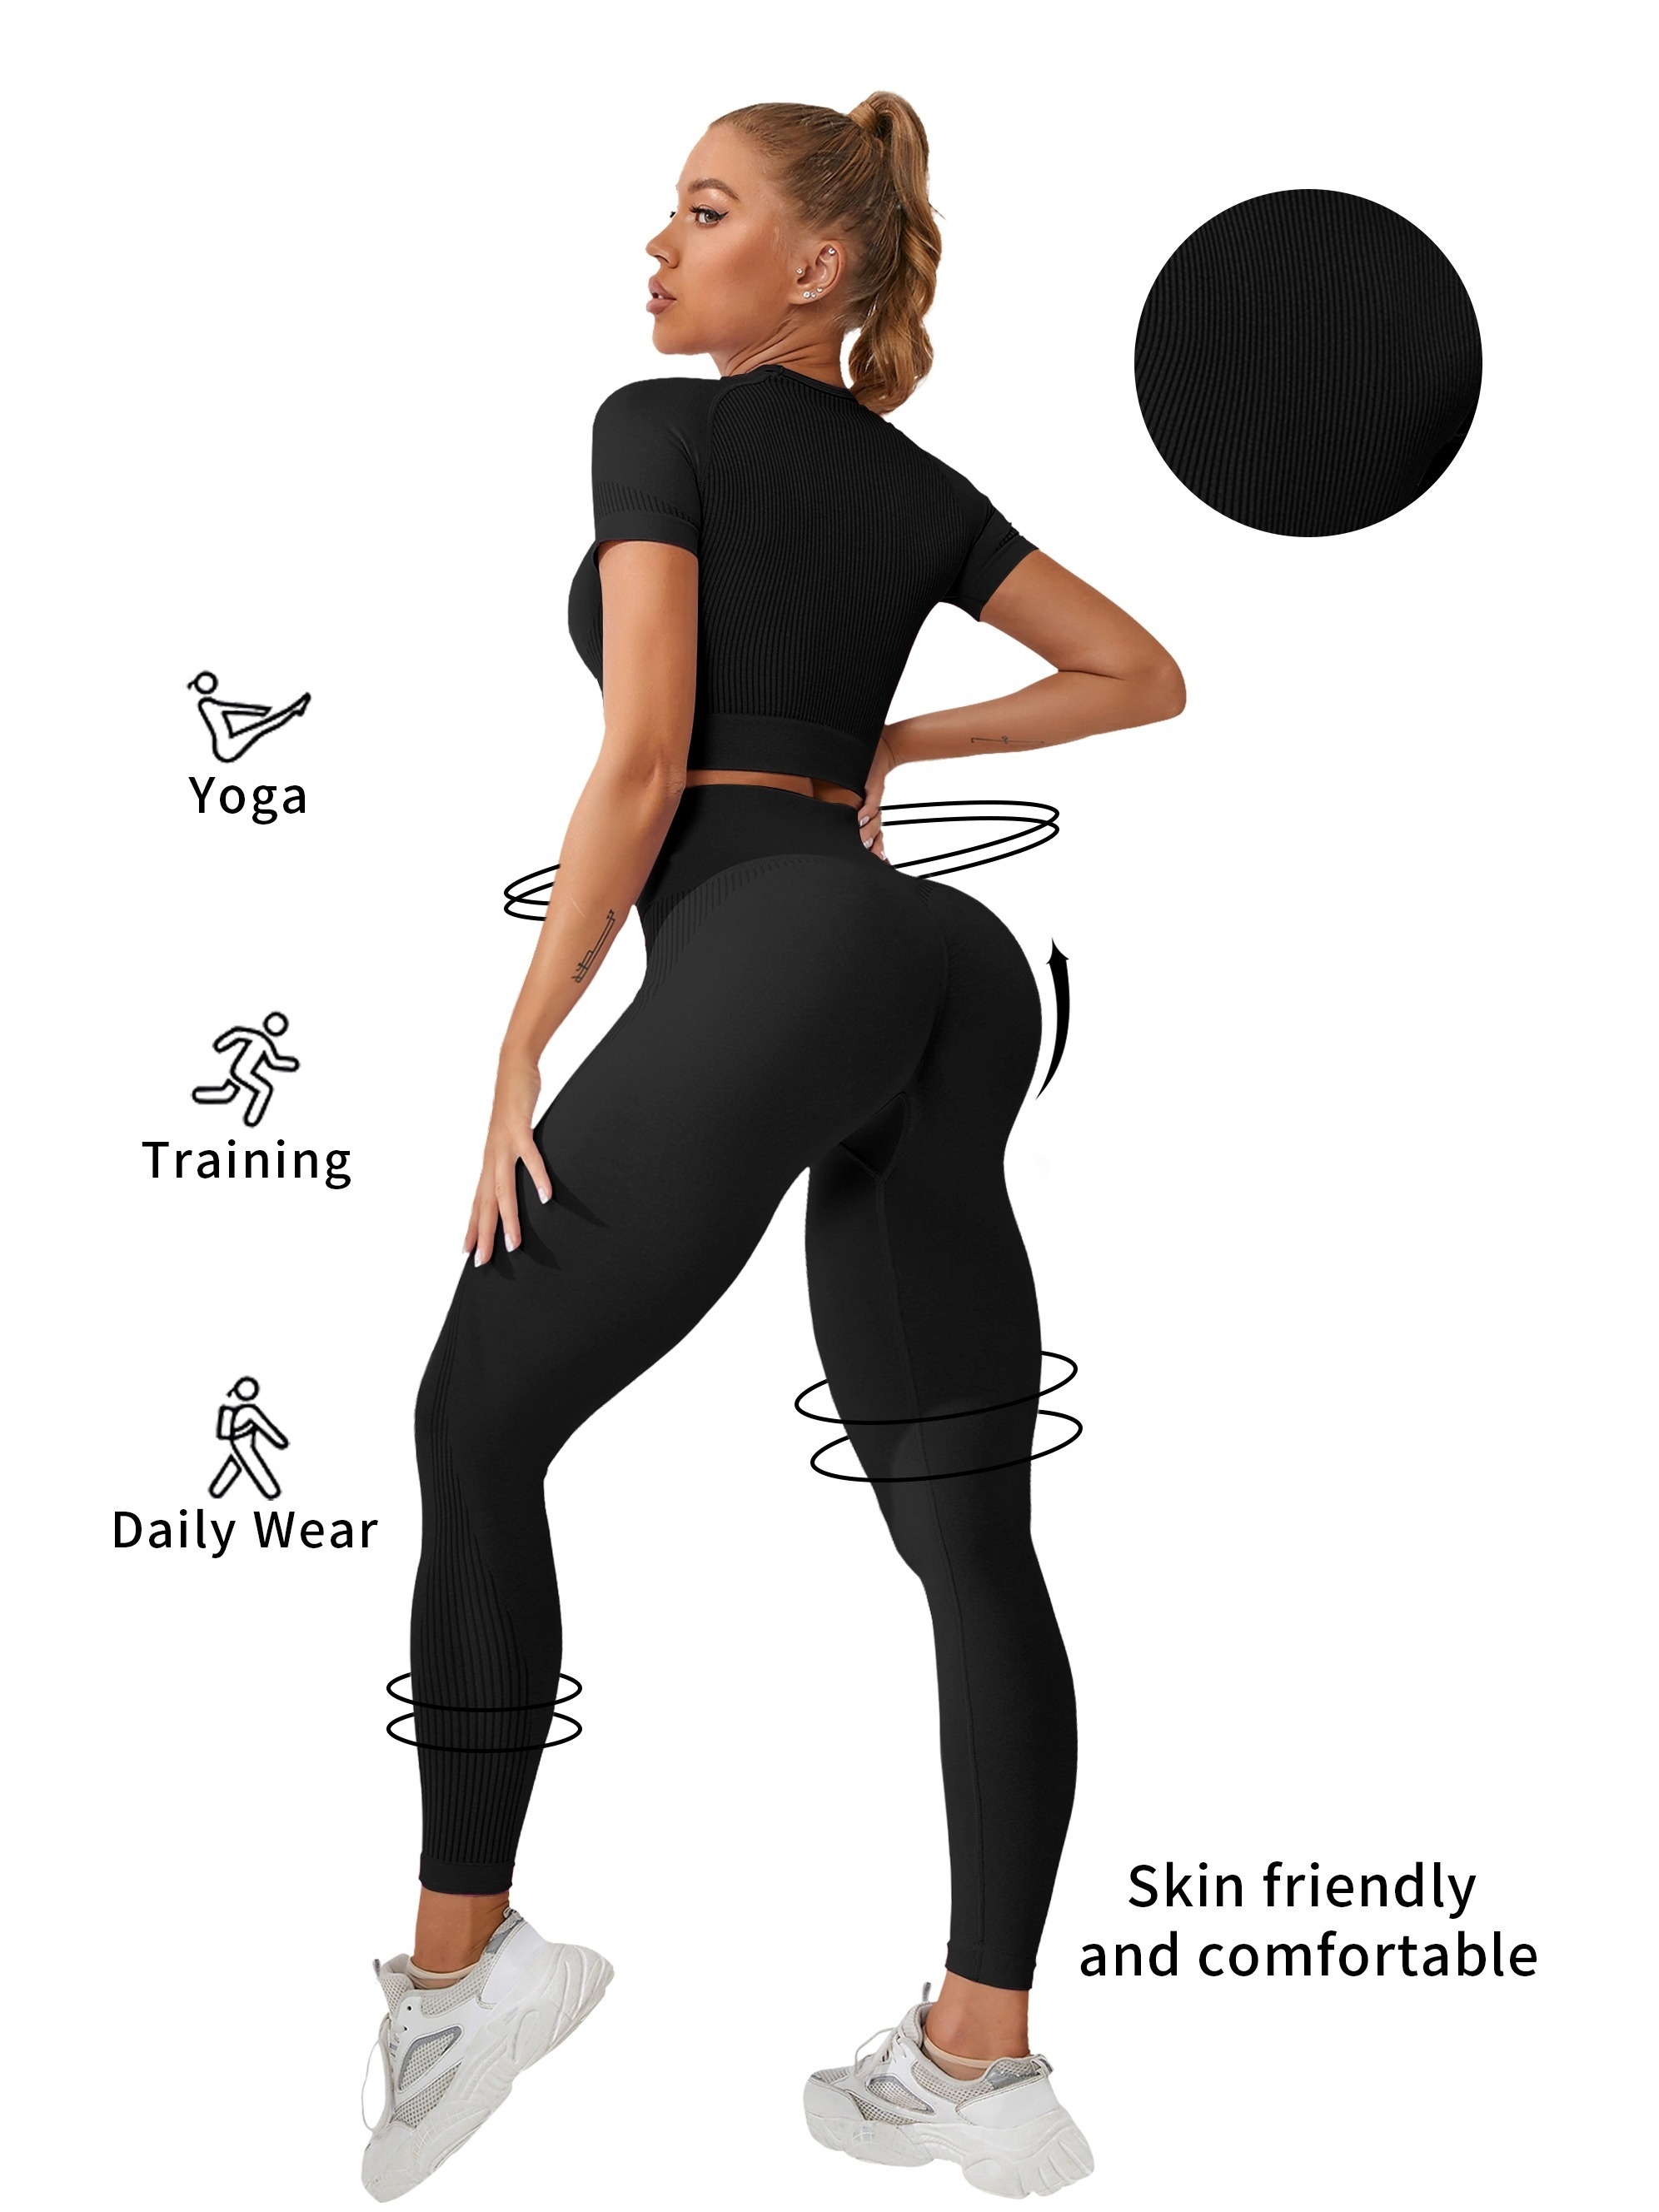 Eko-Ley Shop - These perfect, breathable, soft and comfortable Ladies Tops  are a perfect fit for All Women in all Sports, exercises and yoga events.  Enjoy the perfect look and feel of